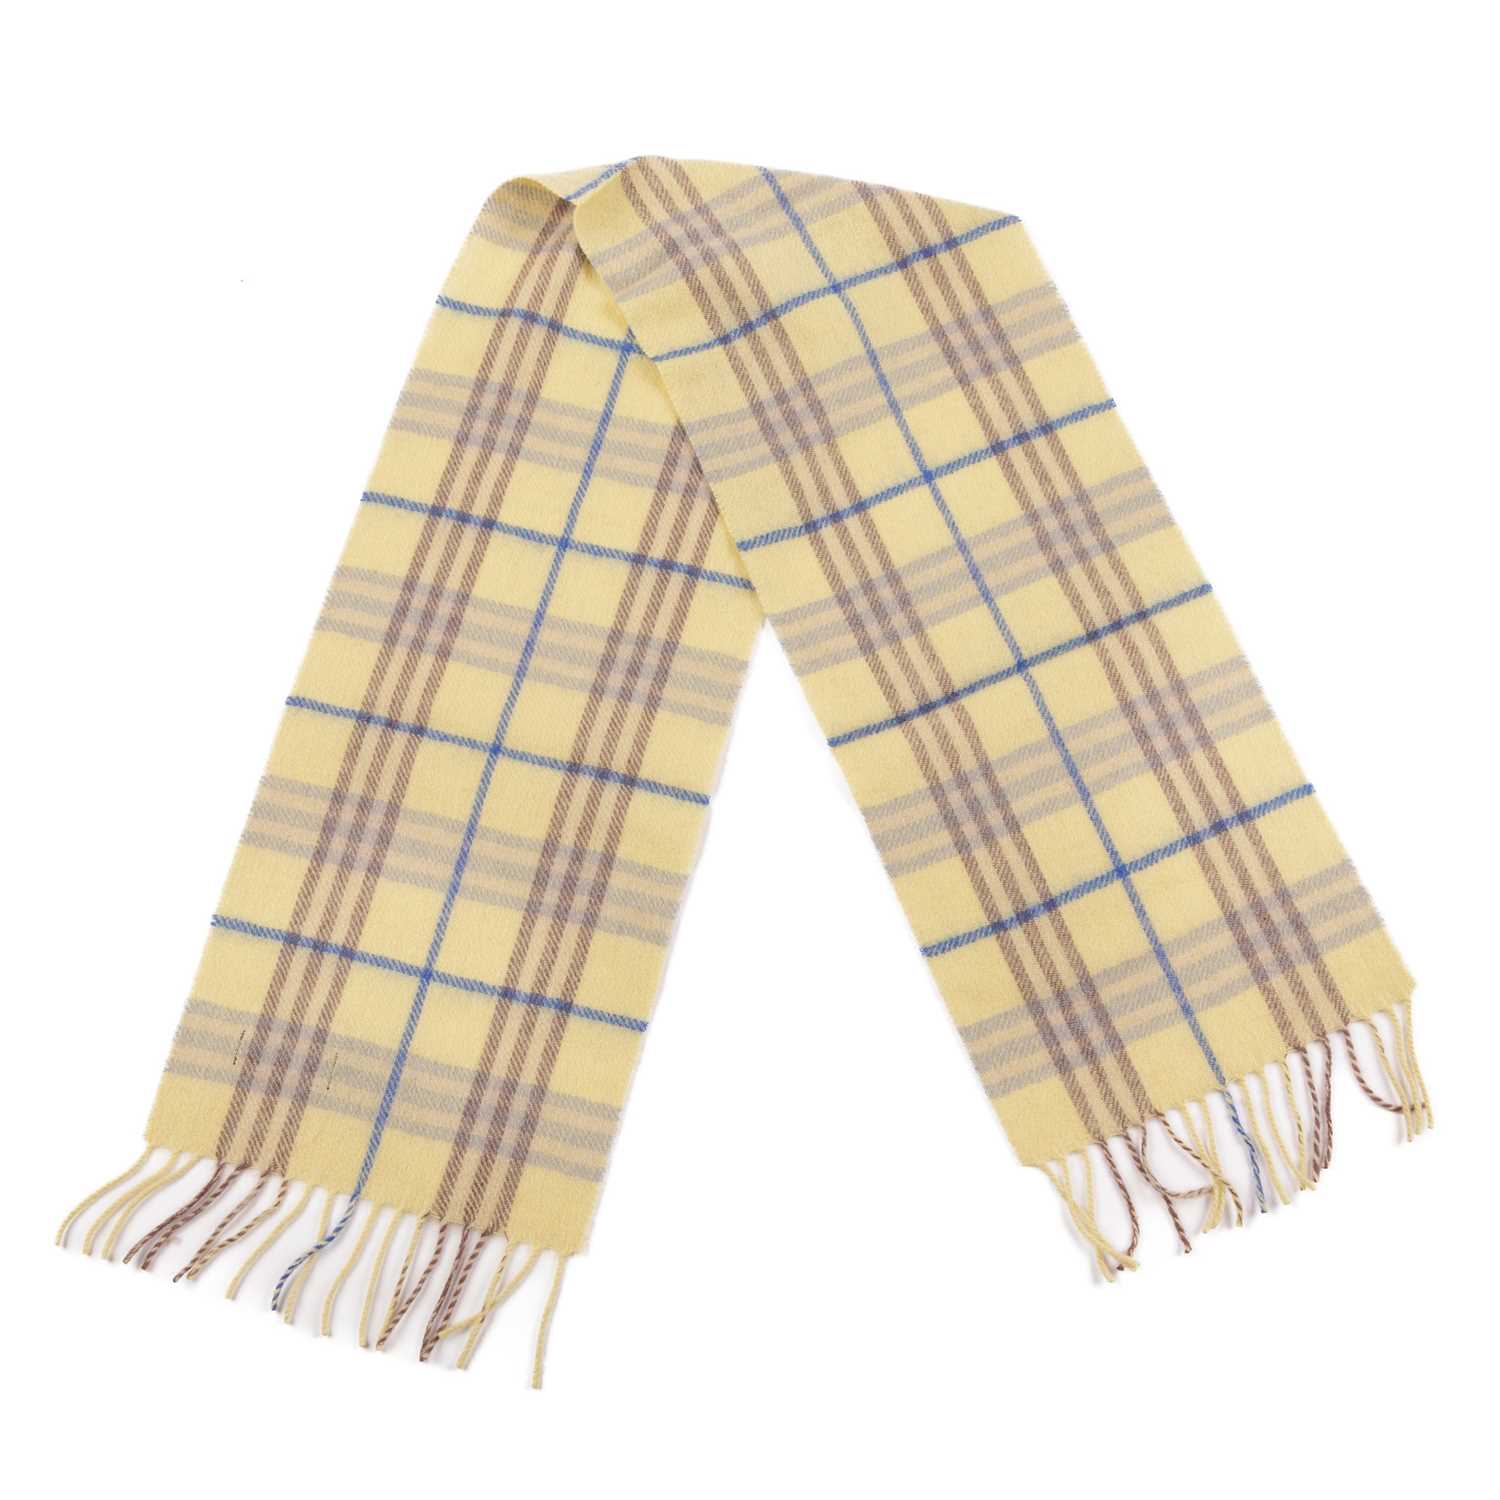 Burberry, two Nova Check lambswool scarves, to include a rose pink scarf and a pale yellow scarf, - Image 3 of 4